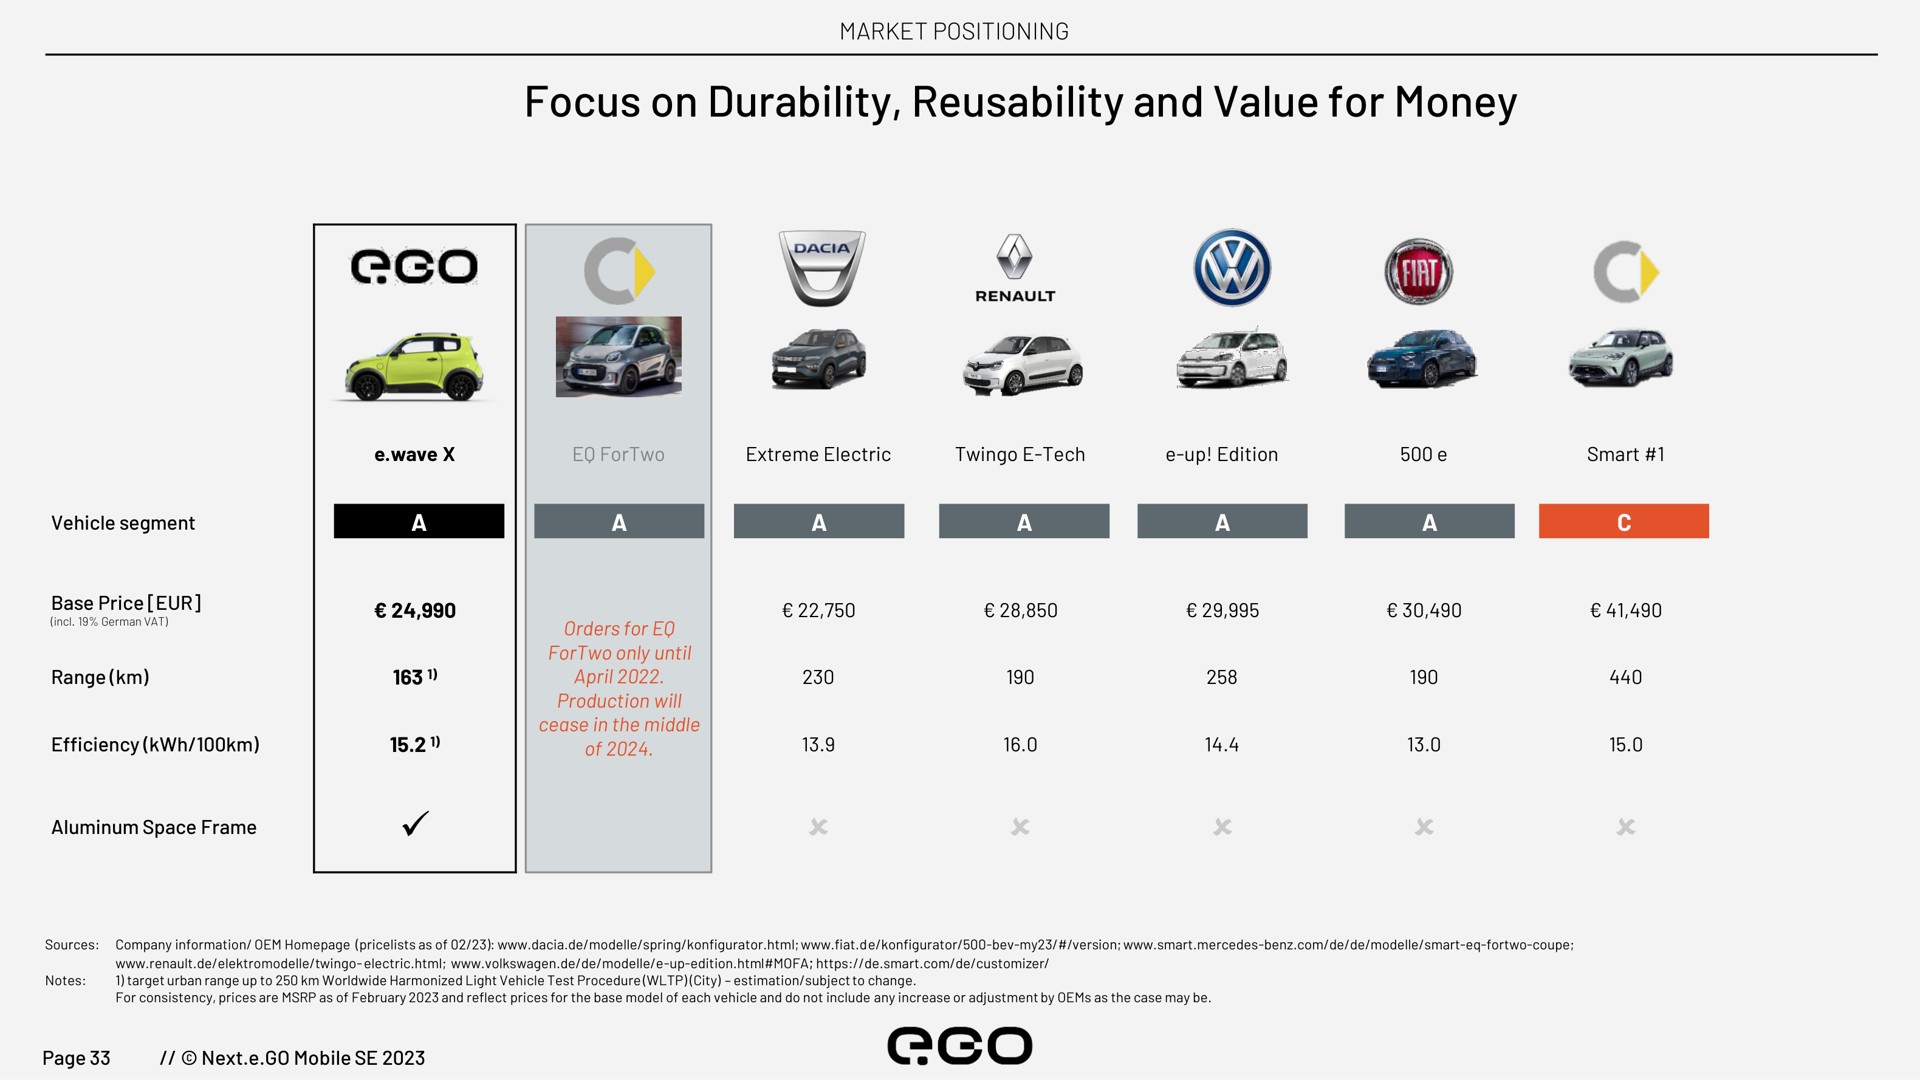 focus on durability and value for money | Next.e.GO